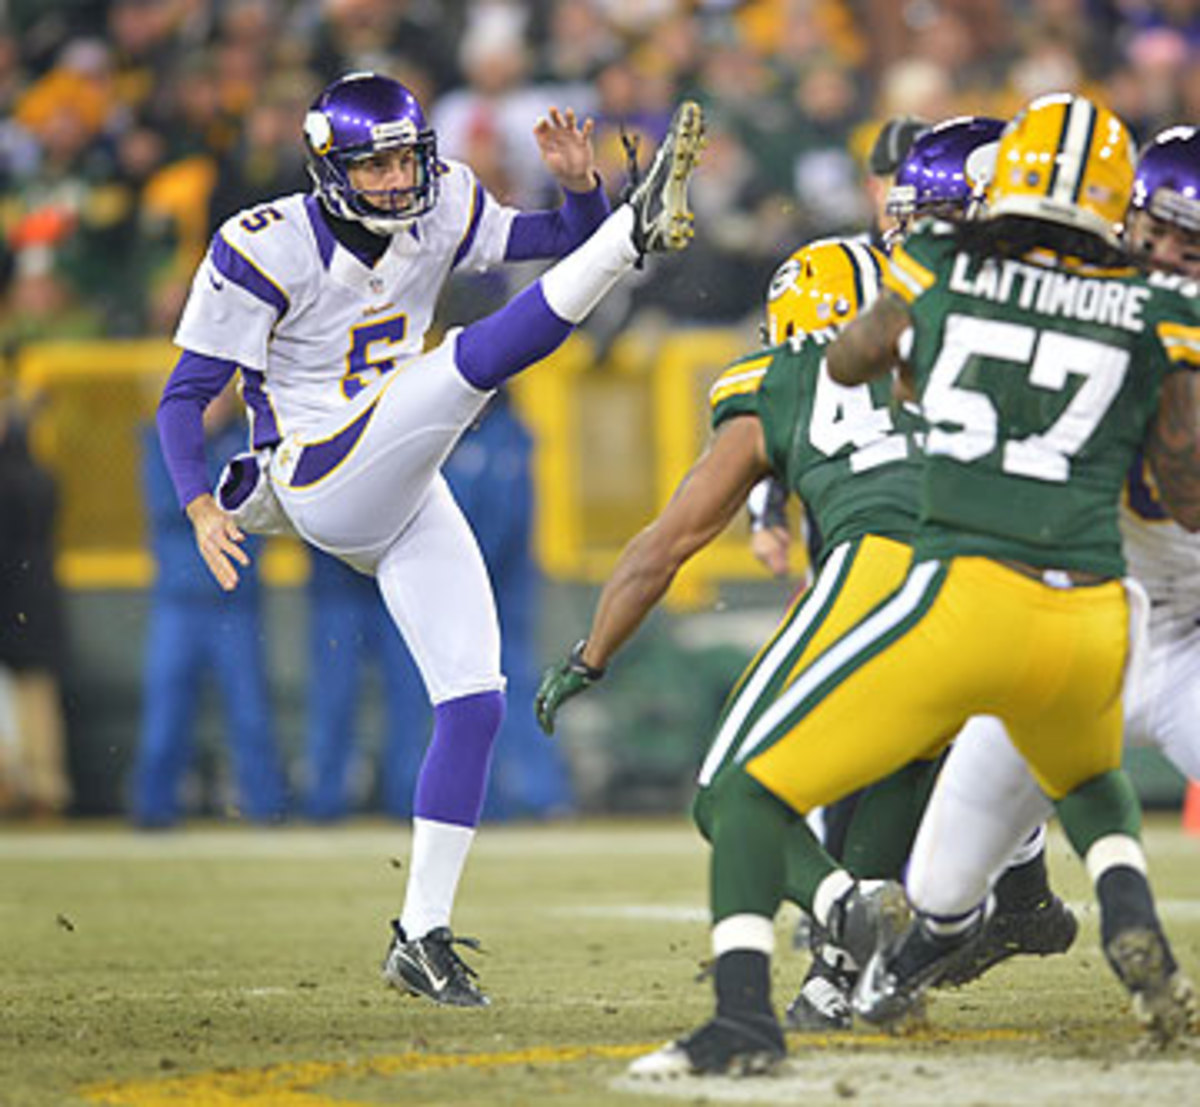 Chris Kluwe is planning to sue the Vikings for defamation among other accusations. (Tom Dahlin/Getty Images)